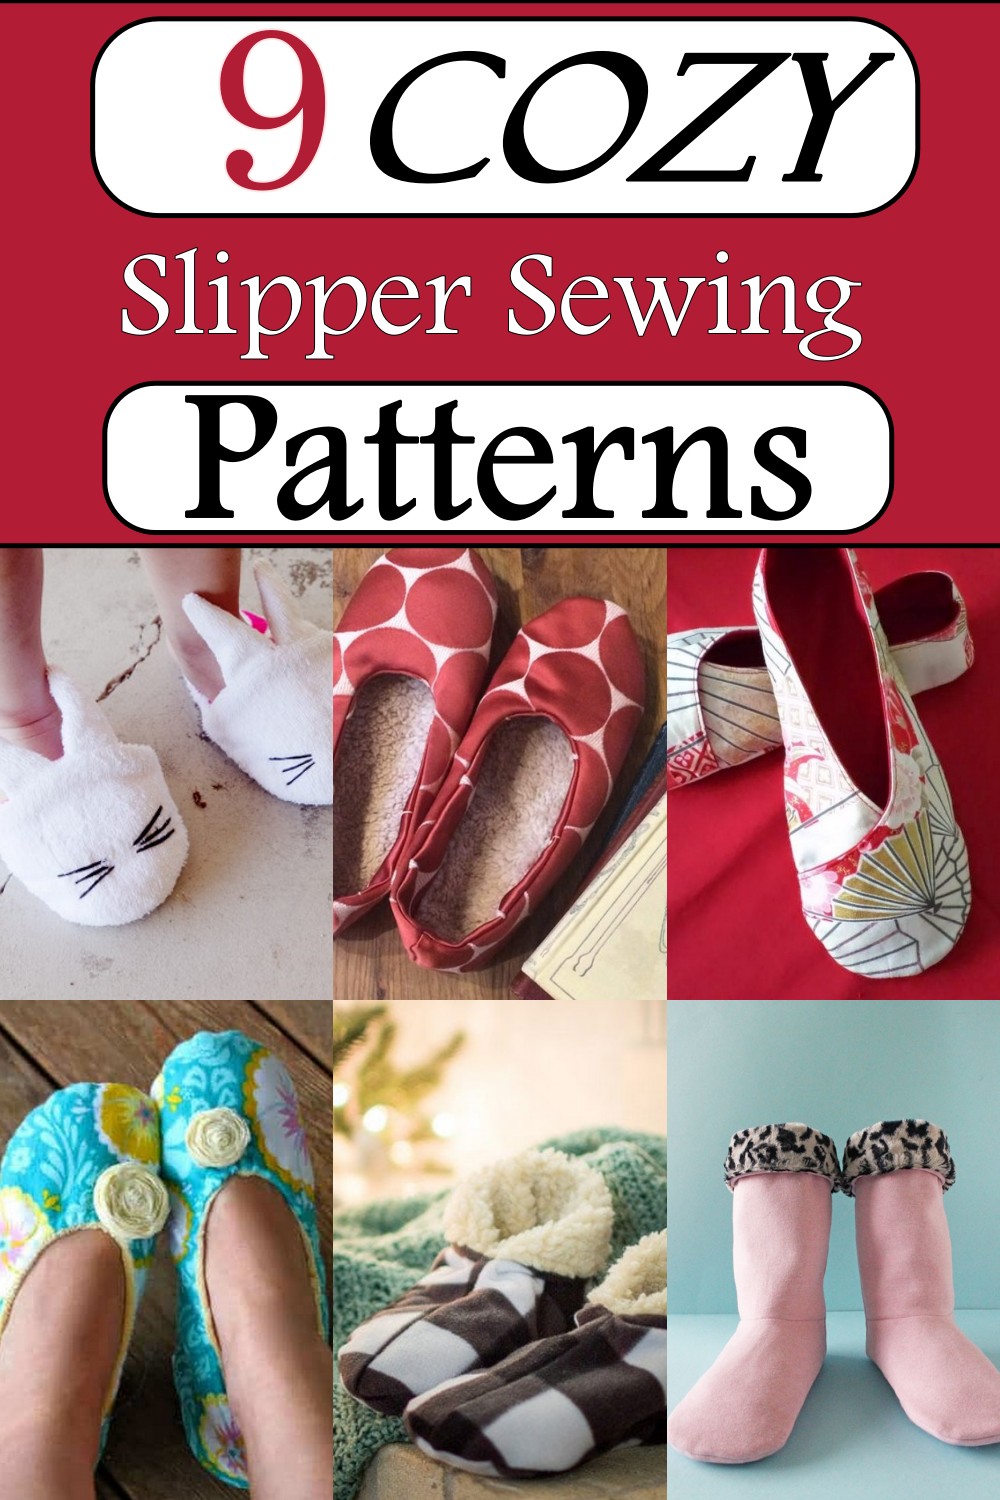 Cozy Slipper Sewing Patterns 1